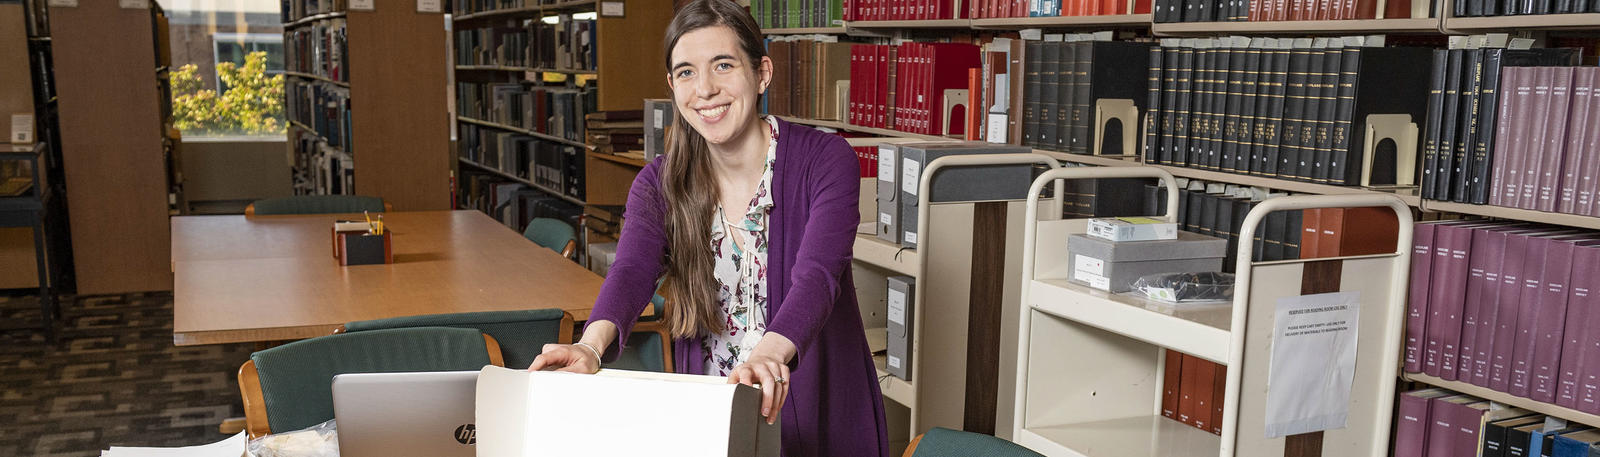 photo of a person with materials in special collections and archives